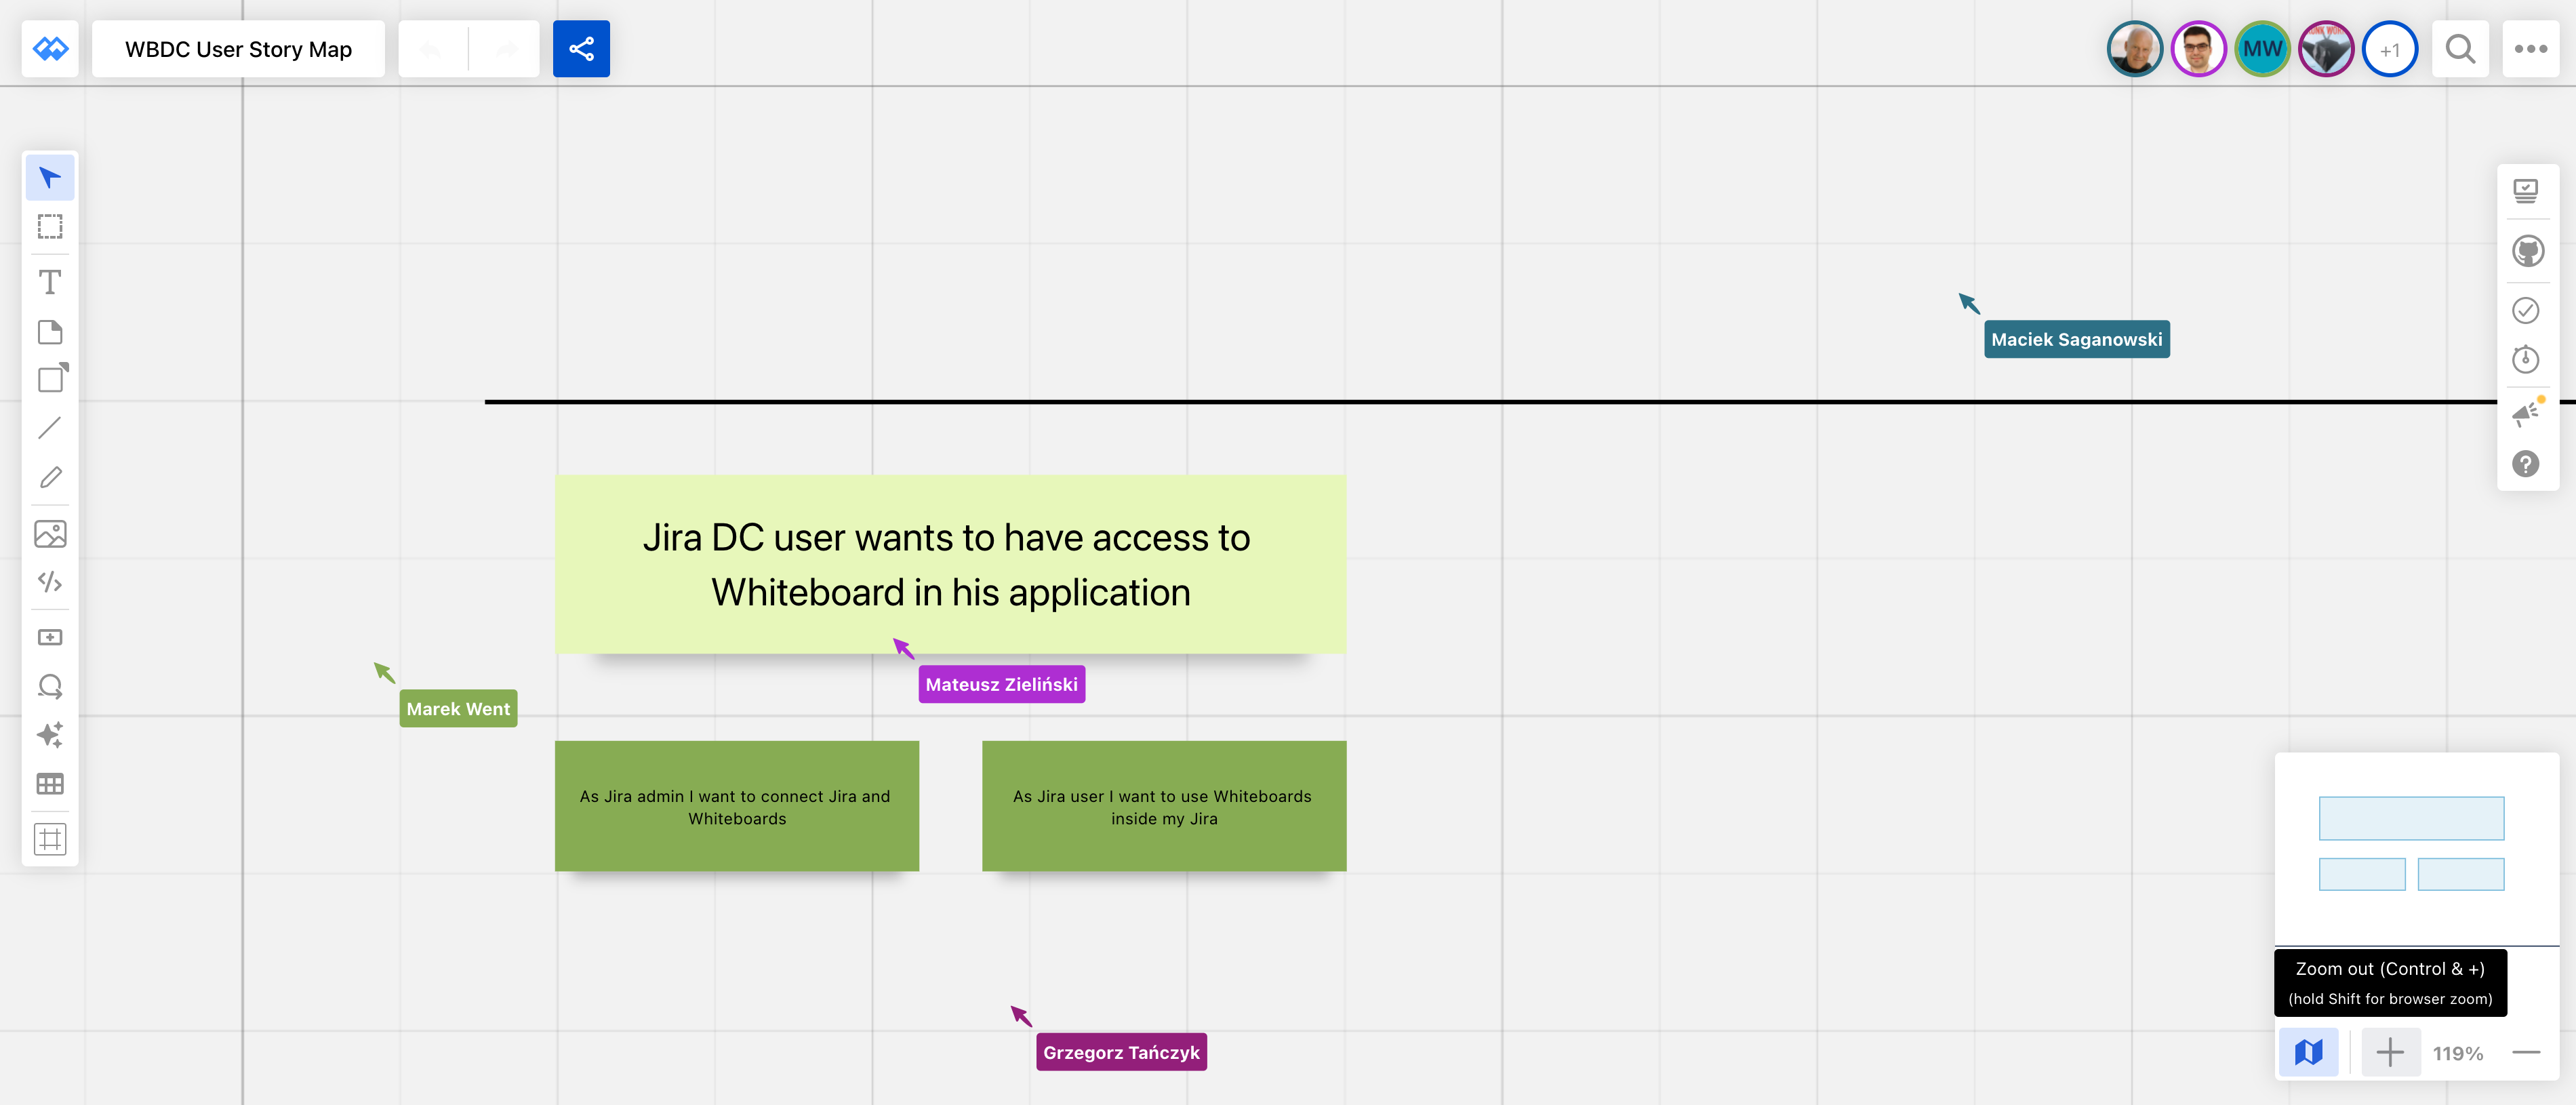 Defining the goal for user story mapping